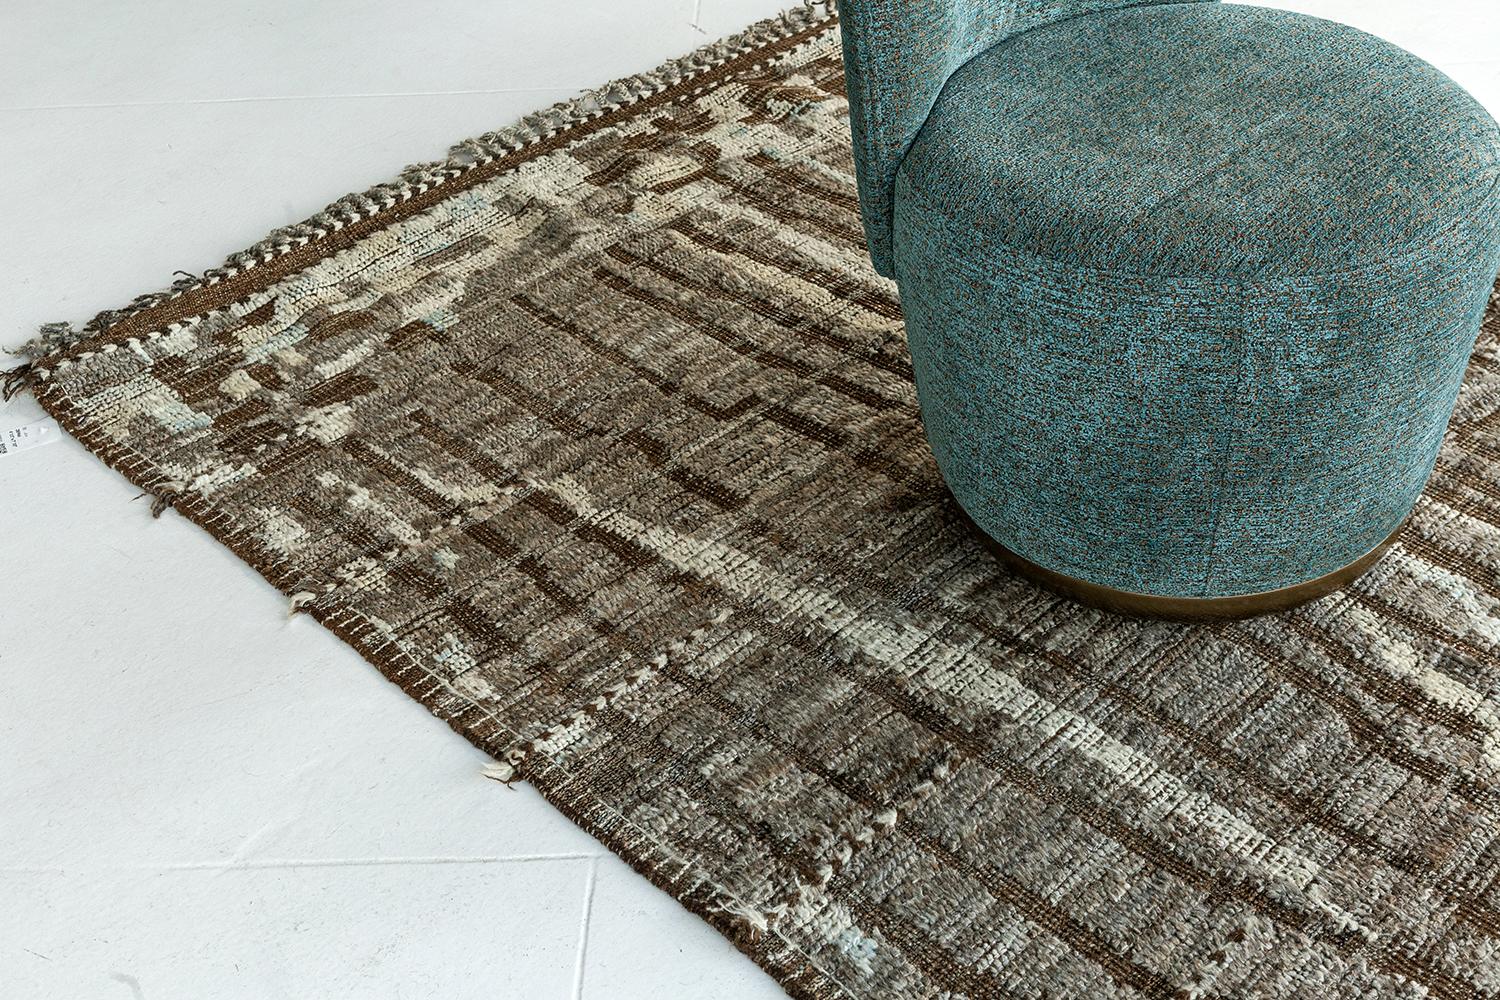 Nazmiyal Collection Beautiful Charcoal Brown Modern Distressed Rug, Country of Origin: Afghanistan, Circa Date: Modern – The deep charcoal and rich, earthy browns of this rug are warm and add a casual feel to the room. This year, designers are